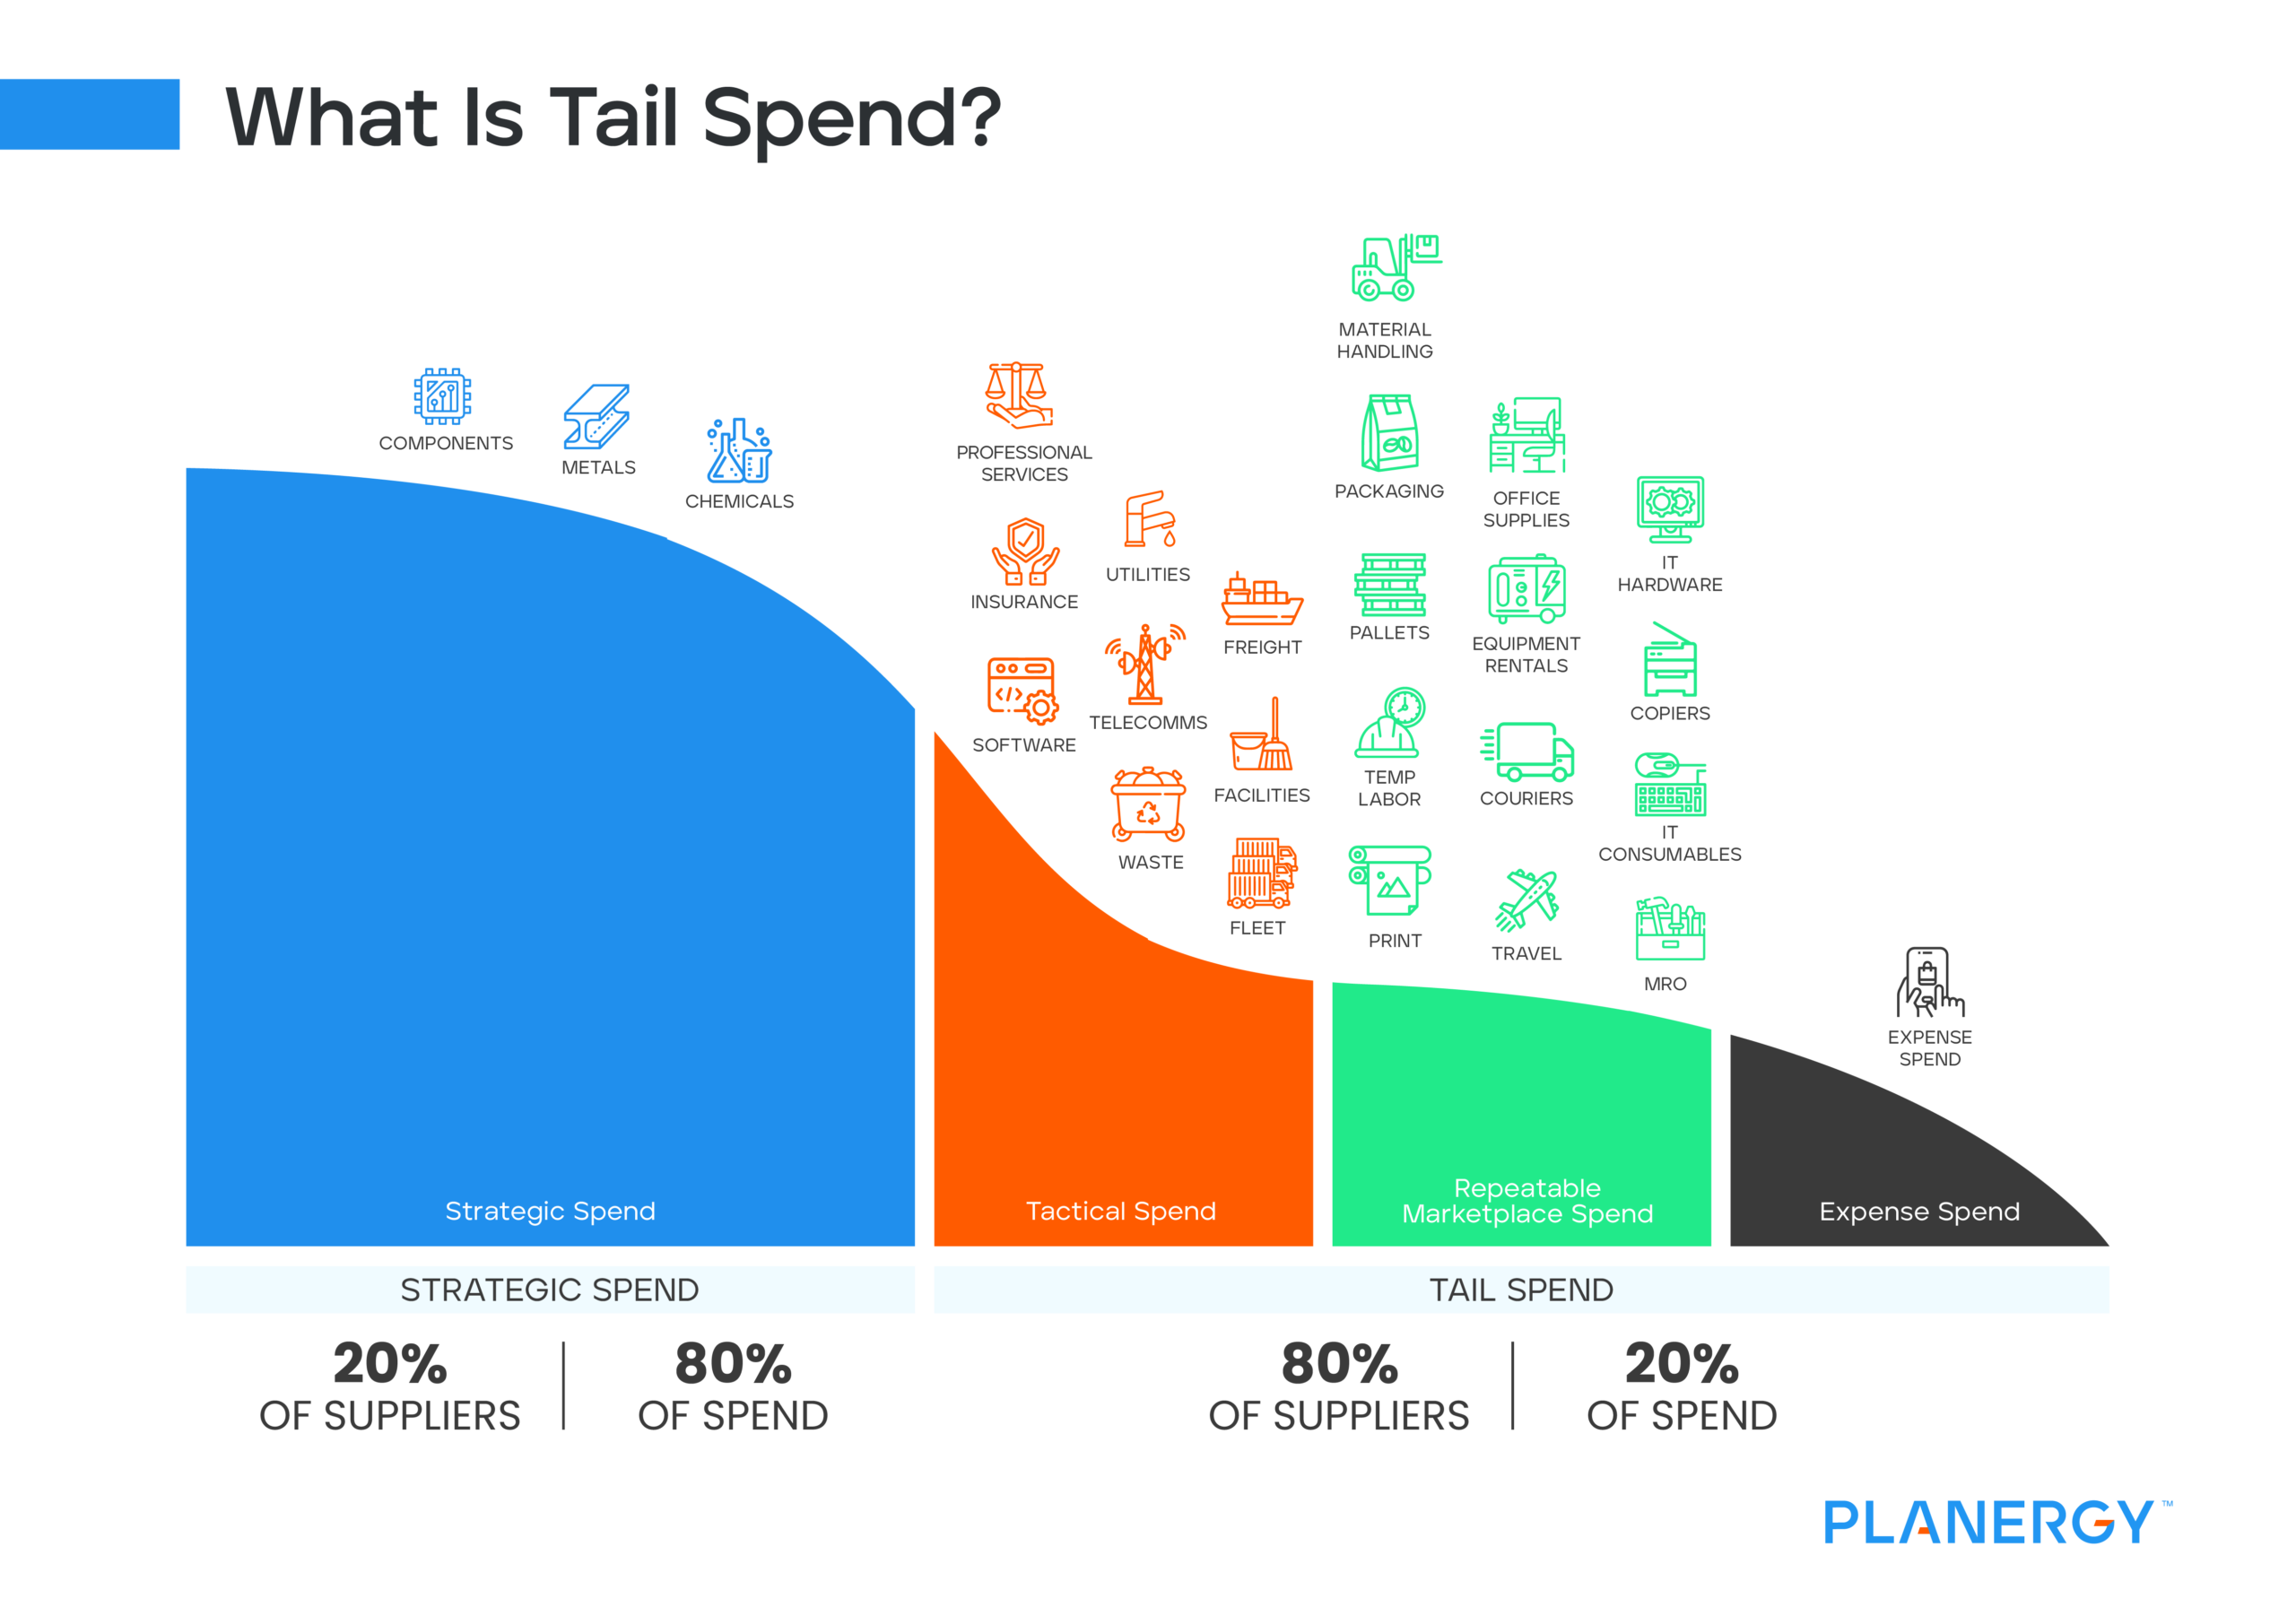 What is Tail Spend